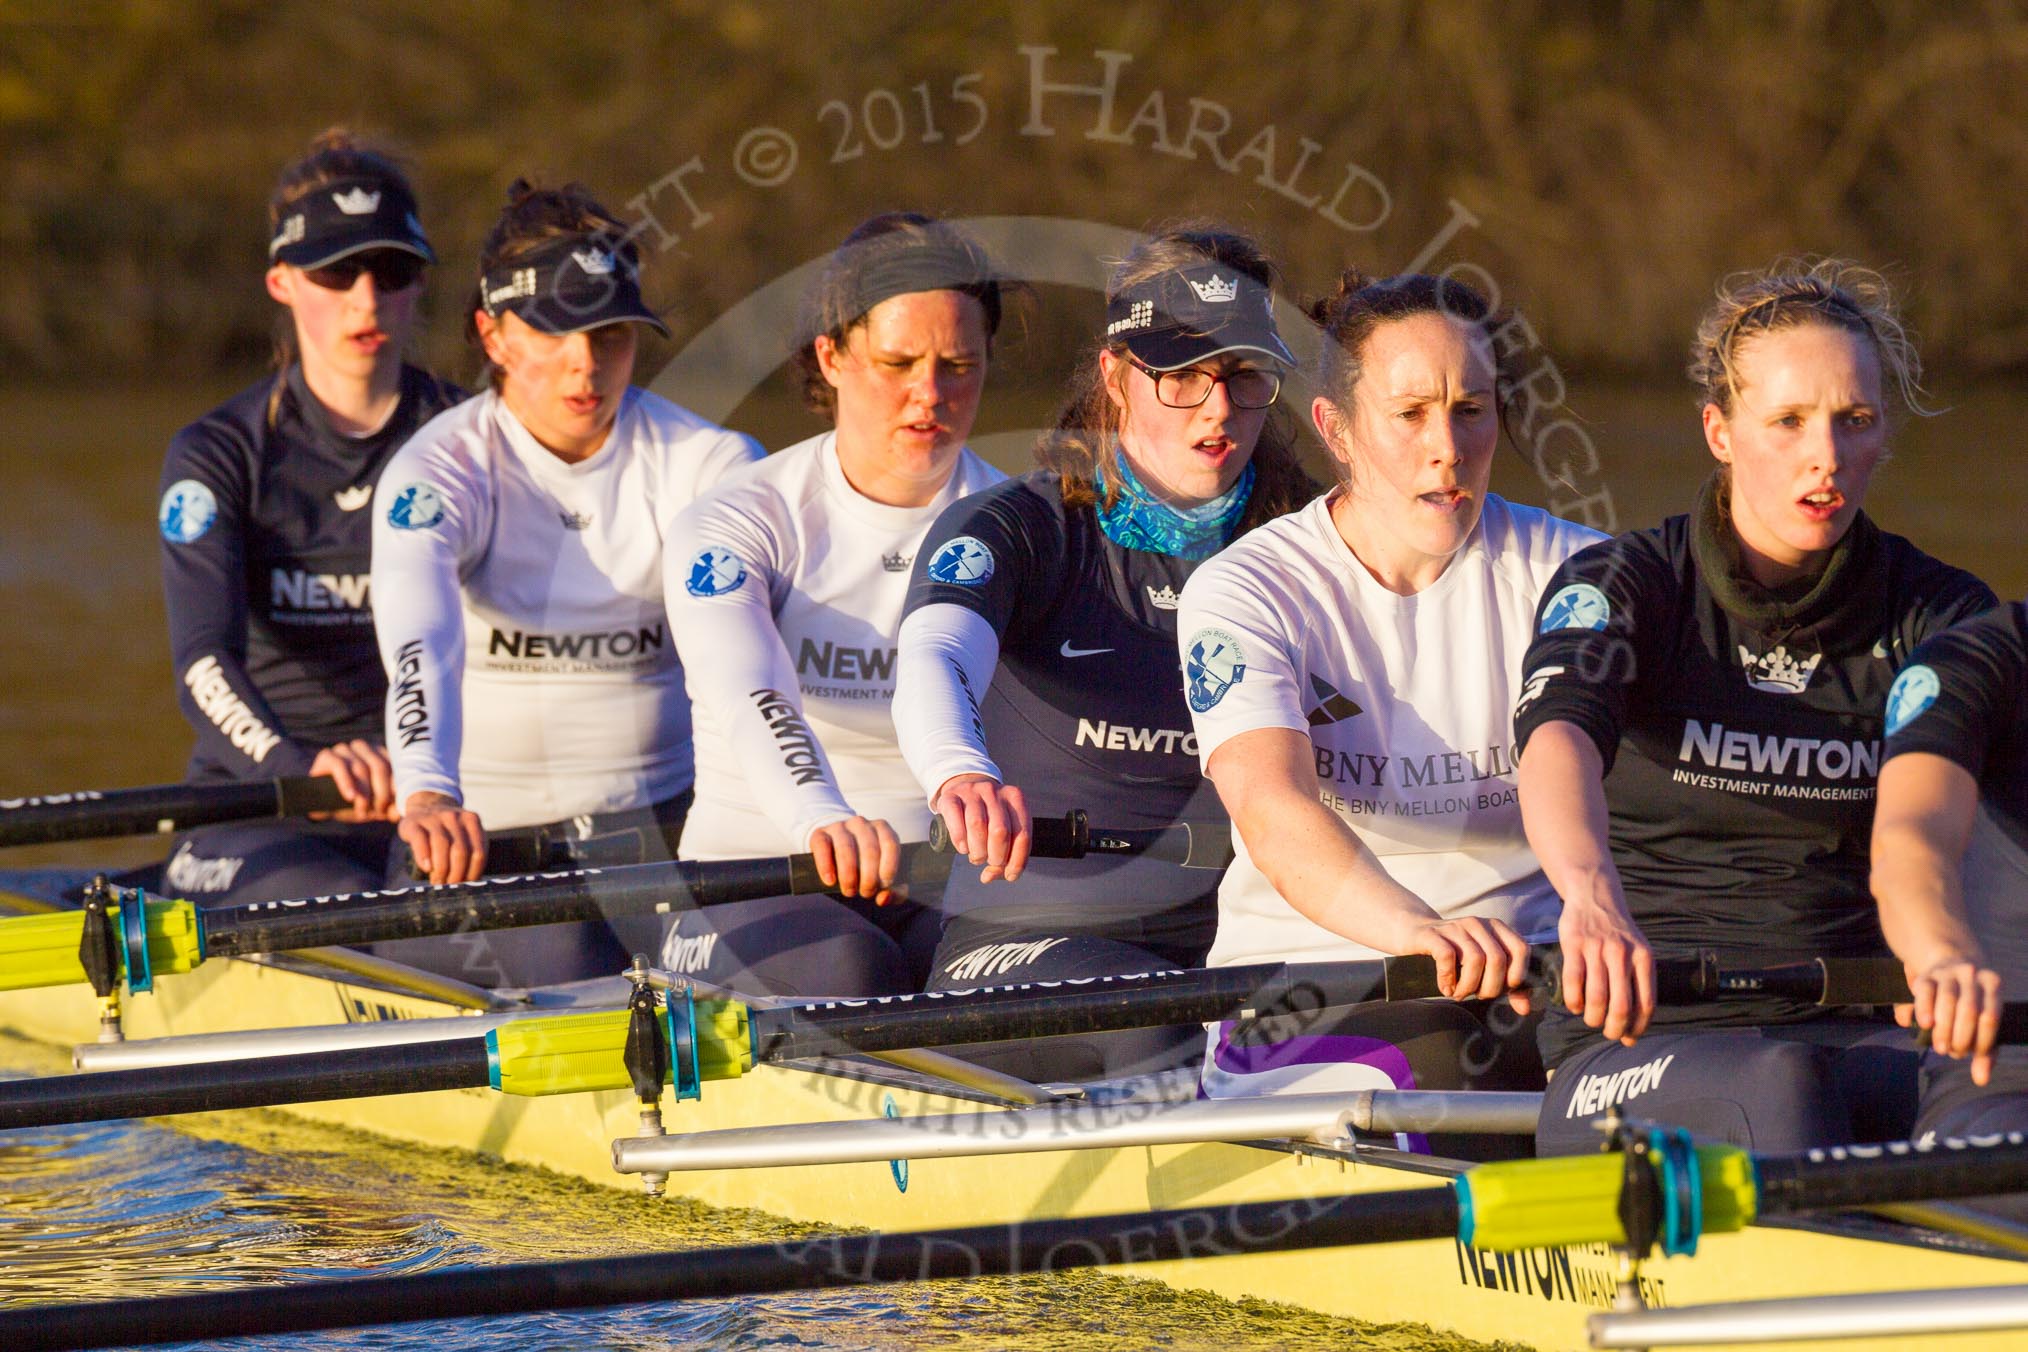 The Boat Race season 2015: OUWBC training Wallingford.

Wallingford,

United Kingdom,
on 04 March 2015 at 17:10, image #268